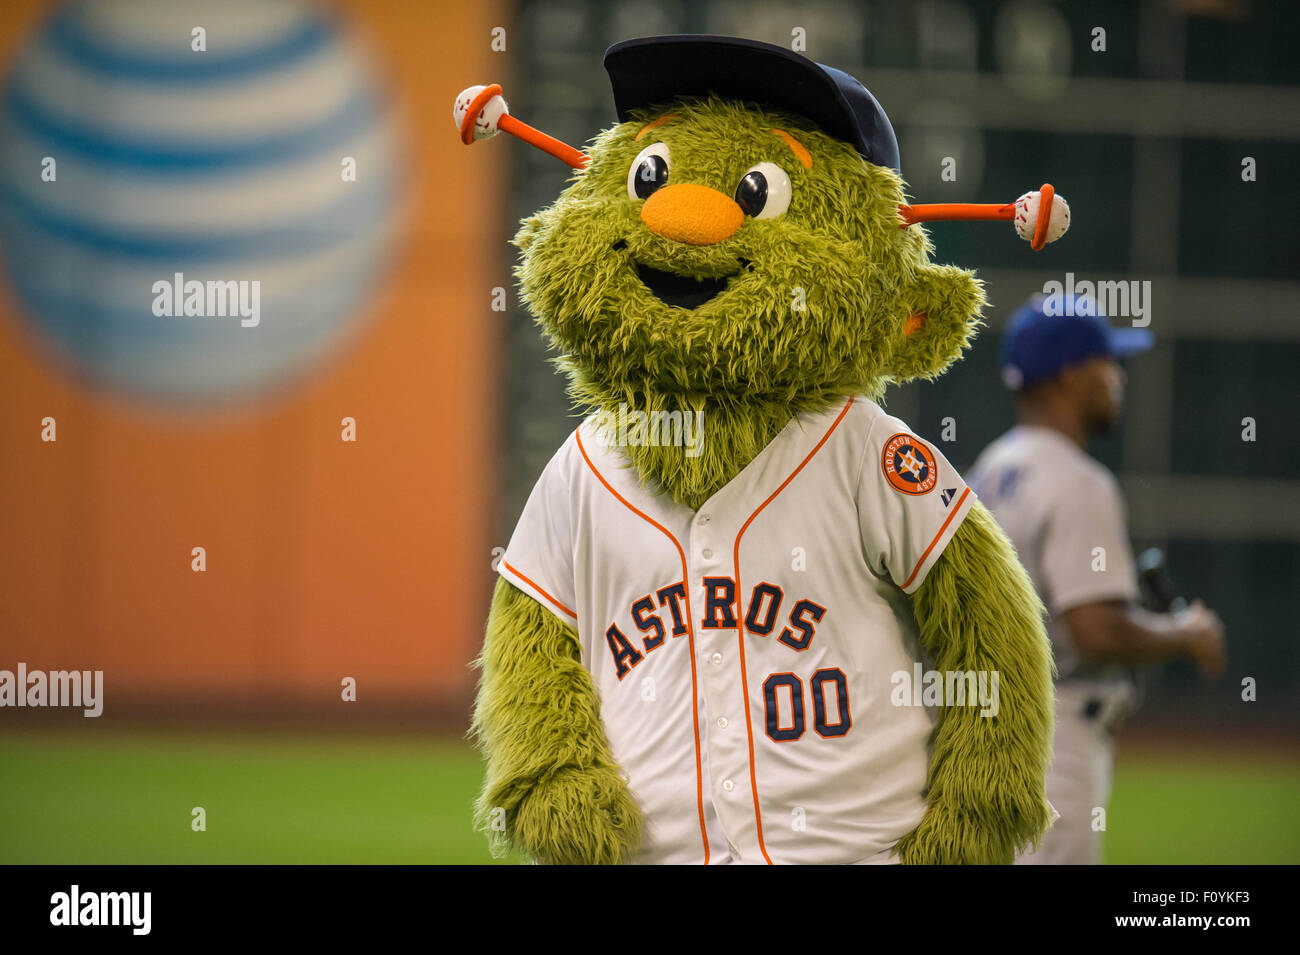 Houston, TX, USA. 23rd Aug, 2015. Houston Astros mascot Orbit prior to a Major League Baseball game between the Houston Astros and the Los Angeles Dodgers at Minute Maid Park in Houston, TX. Trask Smith/CSM/Alamy Live News Stock Photo